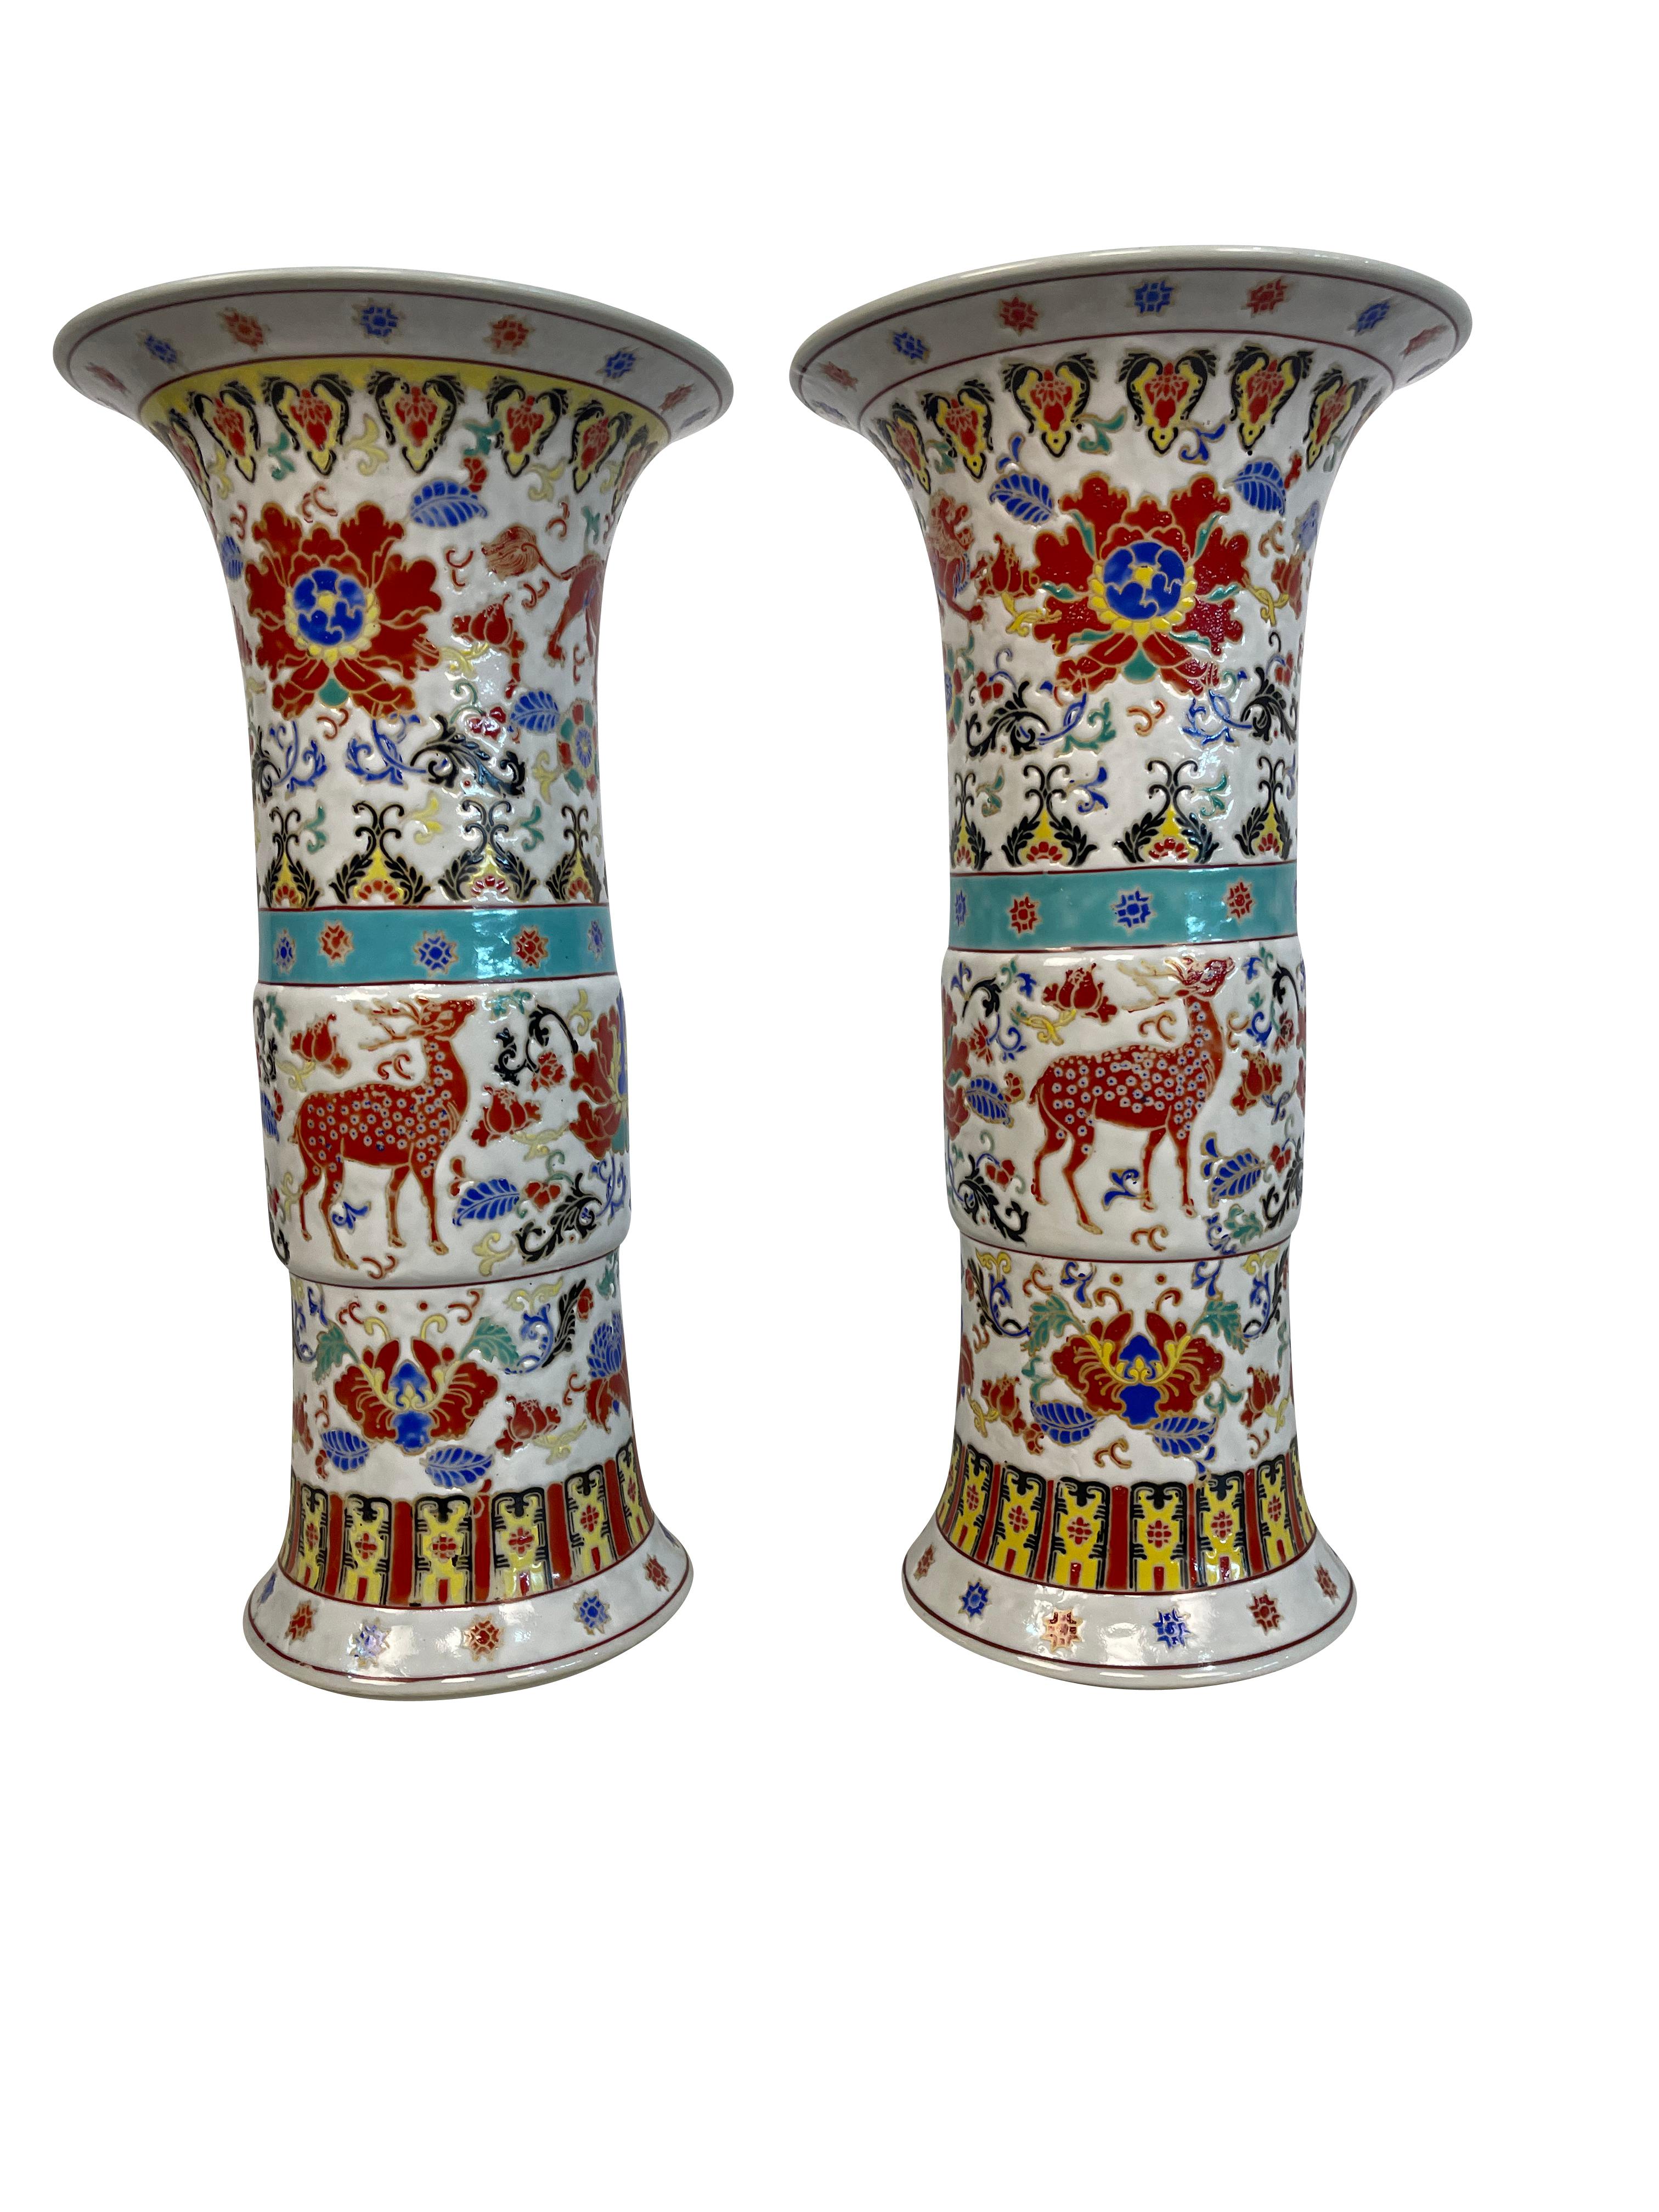 Pair of Yongzheng style Chinese porcelain vases in a high gloss finish in the Gu shape. The vases are decorated with deer, flowers, and animal motifs. Lovely shades of aqua, turquoise, blues, and rust with decorative banding at the middle and base.